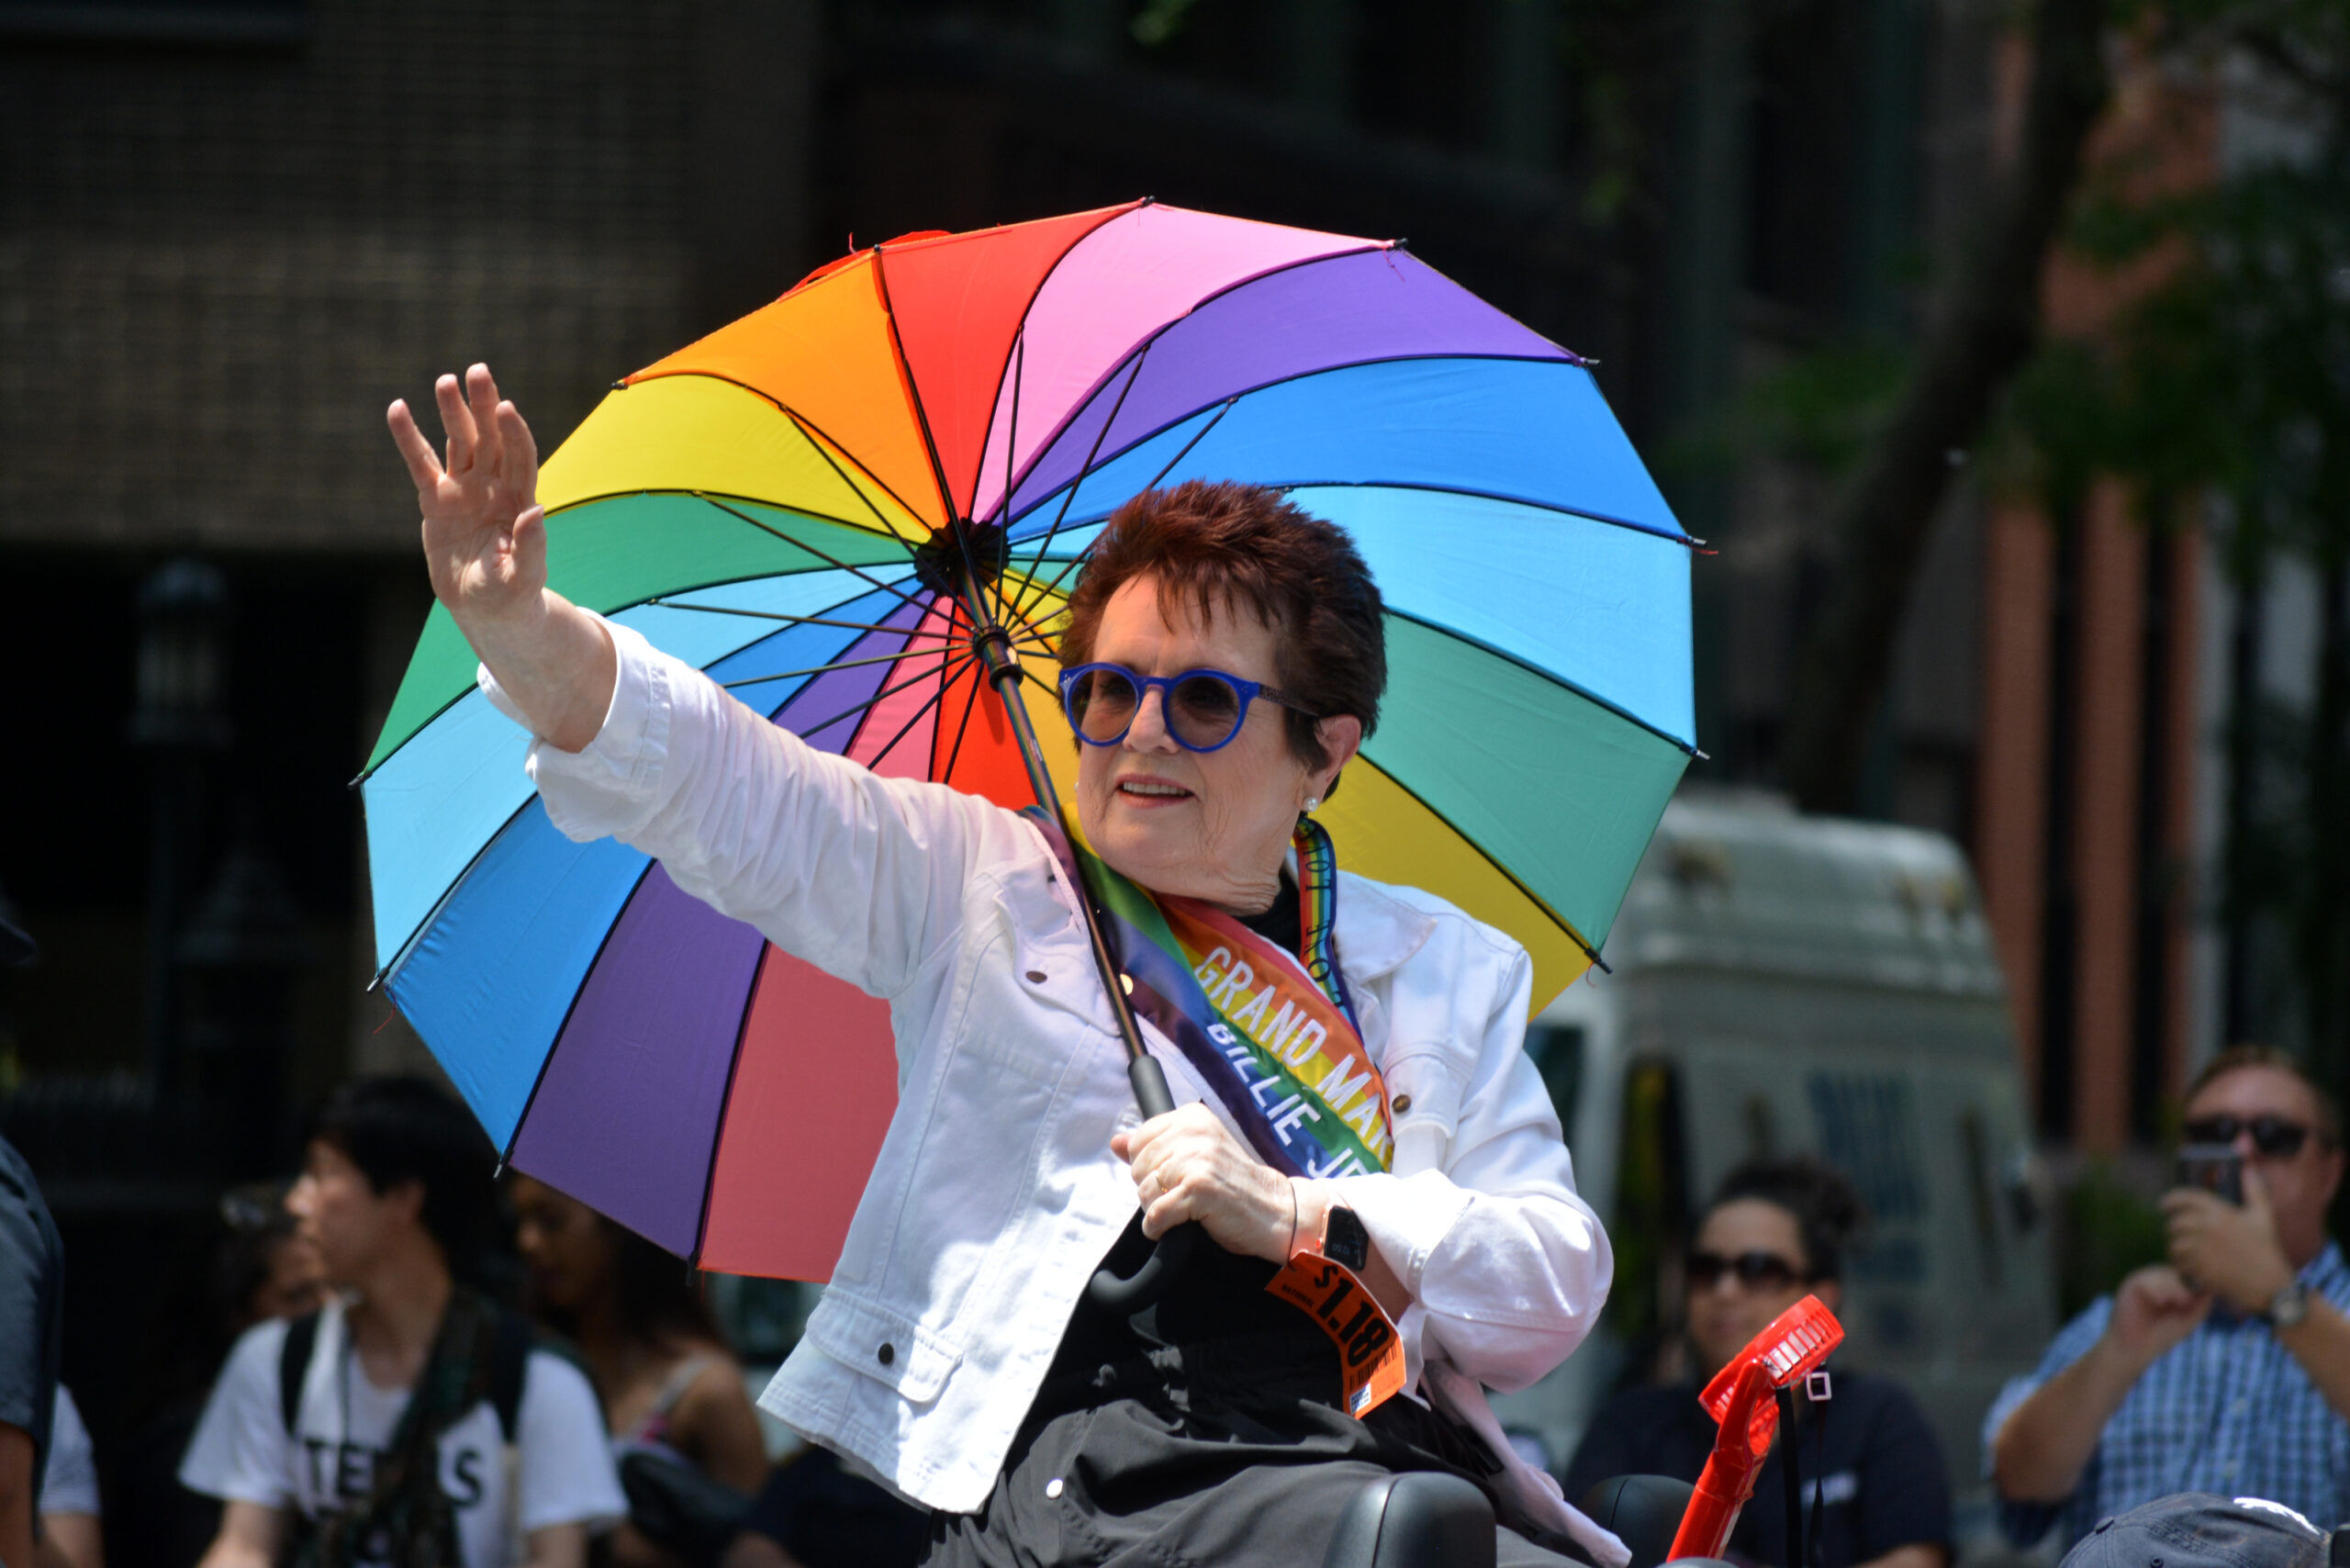 New York City, June 24, 2018 - Tennis legend Billie Jean King waves to the crowd as Grand Marshall of the New York City Pride Parade.